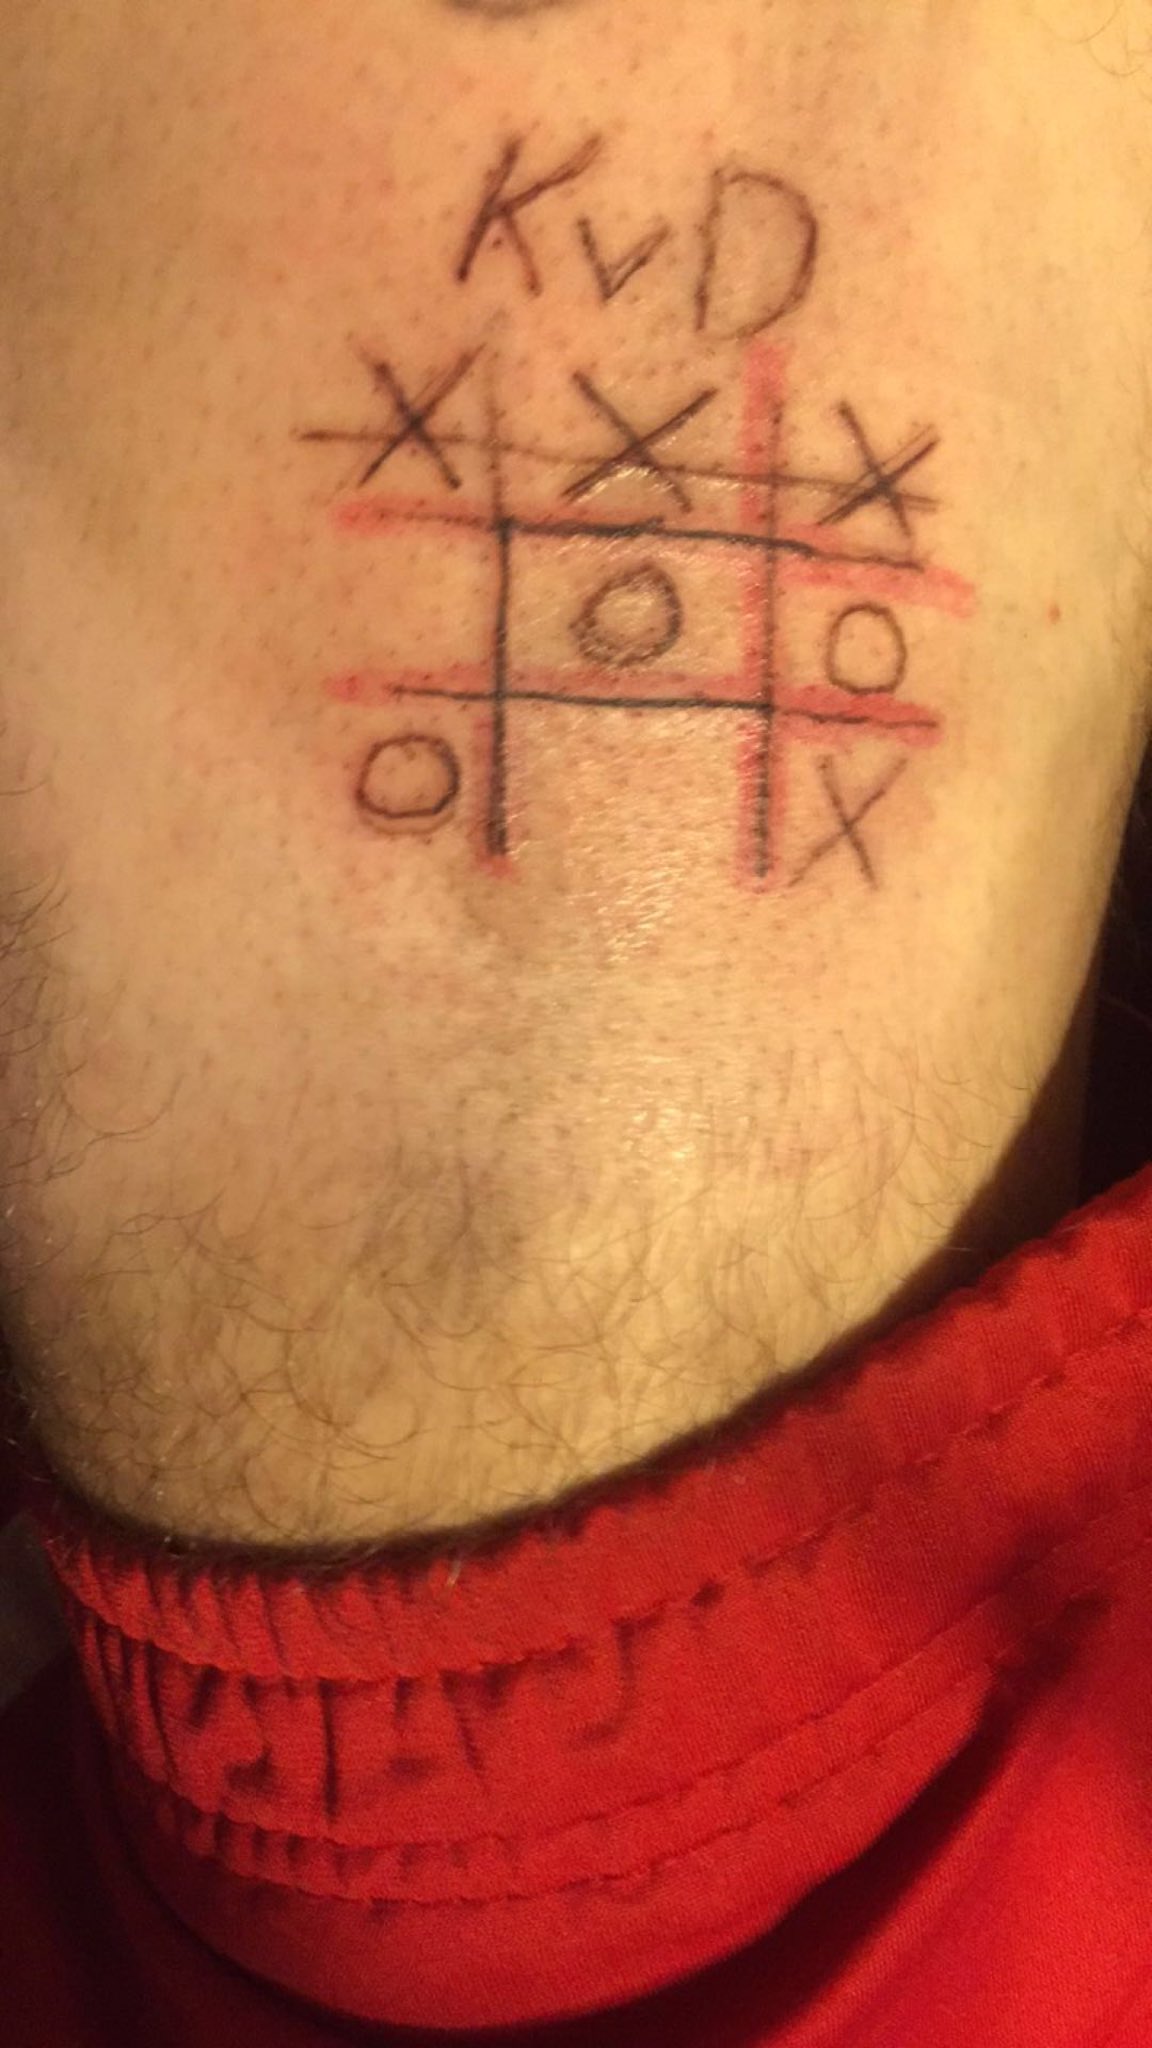 Woman lets friends play noughts and crosses on her leg  using a tattoo gun   Daily Star